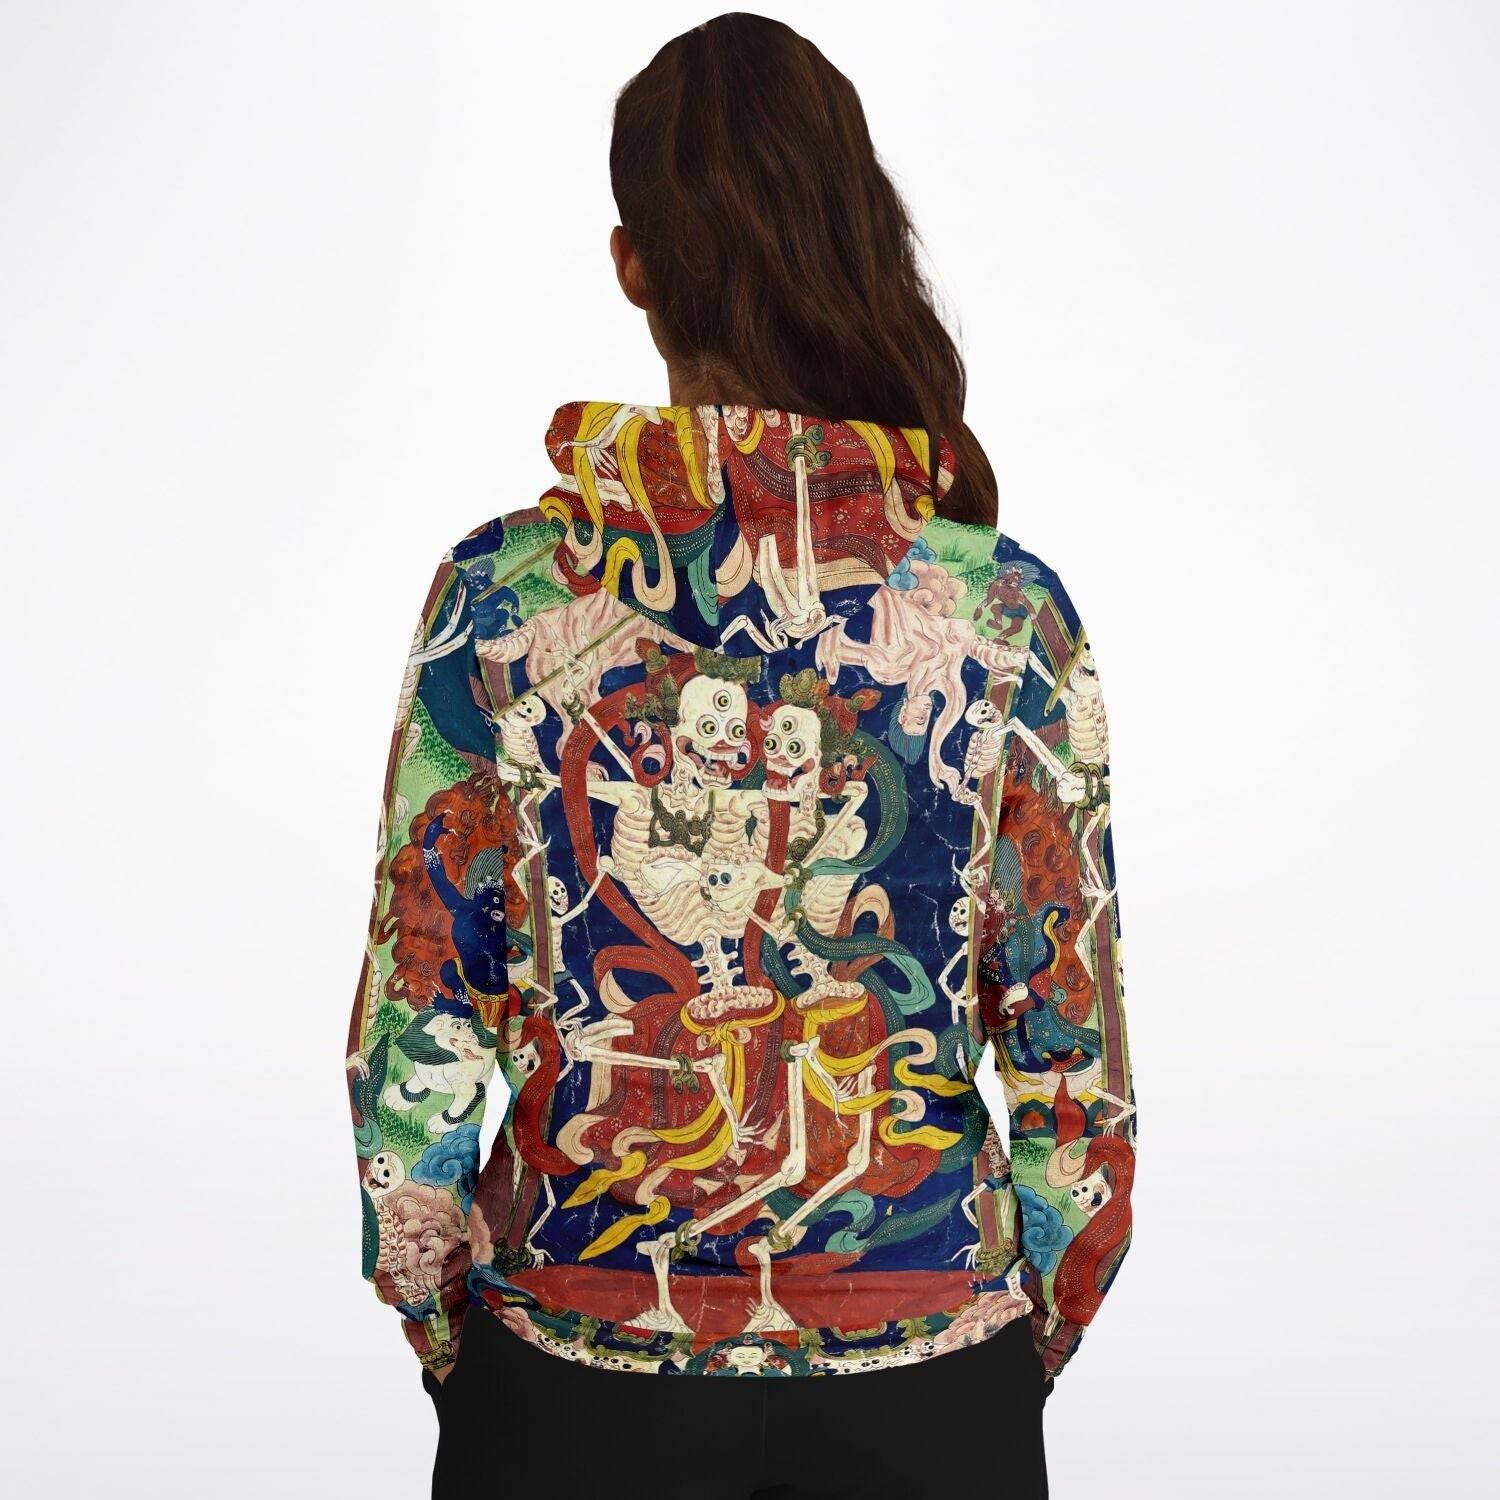 Citipati Skeleton Deity | Tibetan Buddhist Lords of the Cemetery | Dance of Death Skull All-Over-Print Art Hoodie - Sacred Surreal